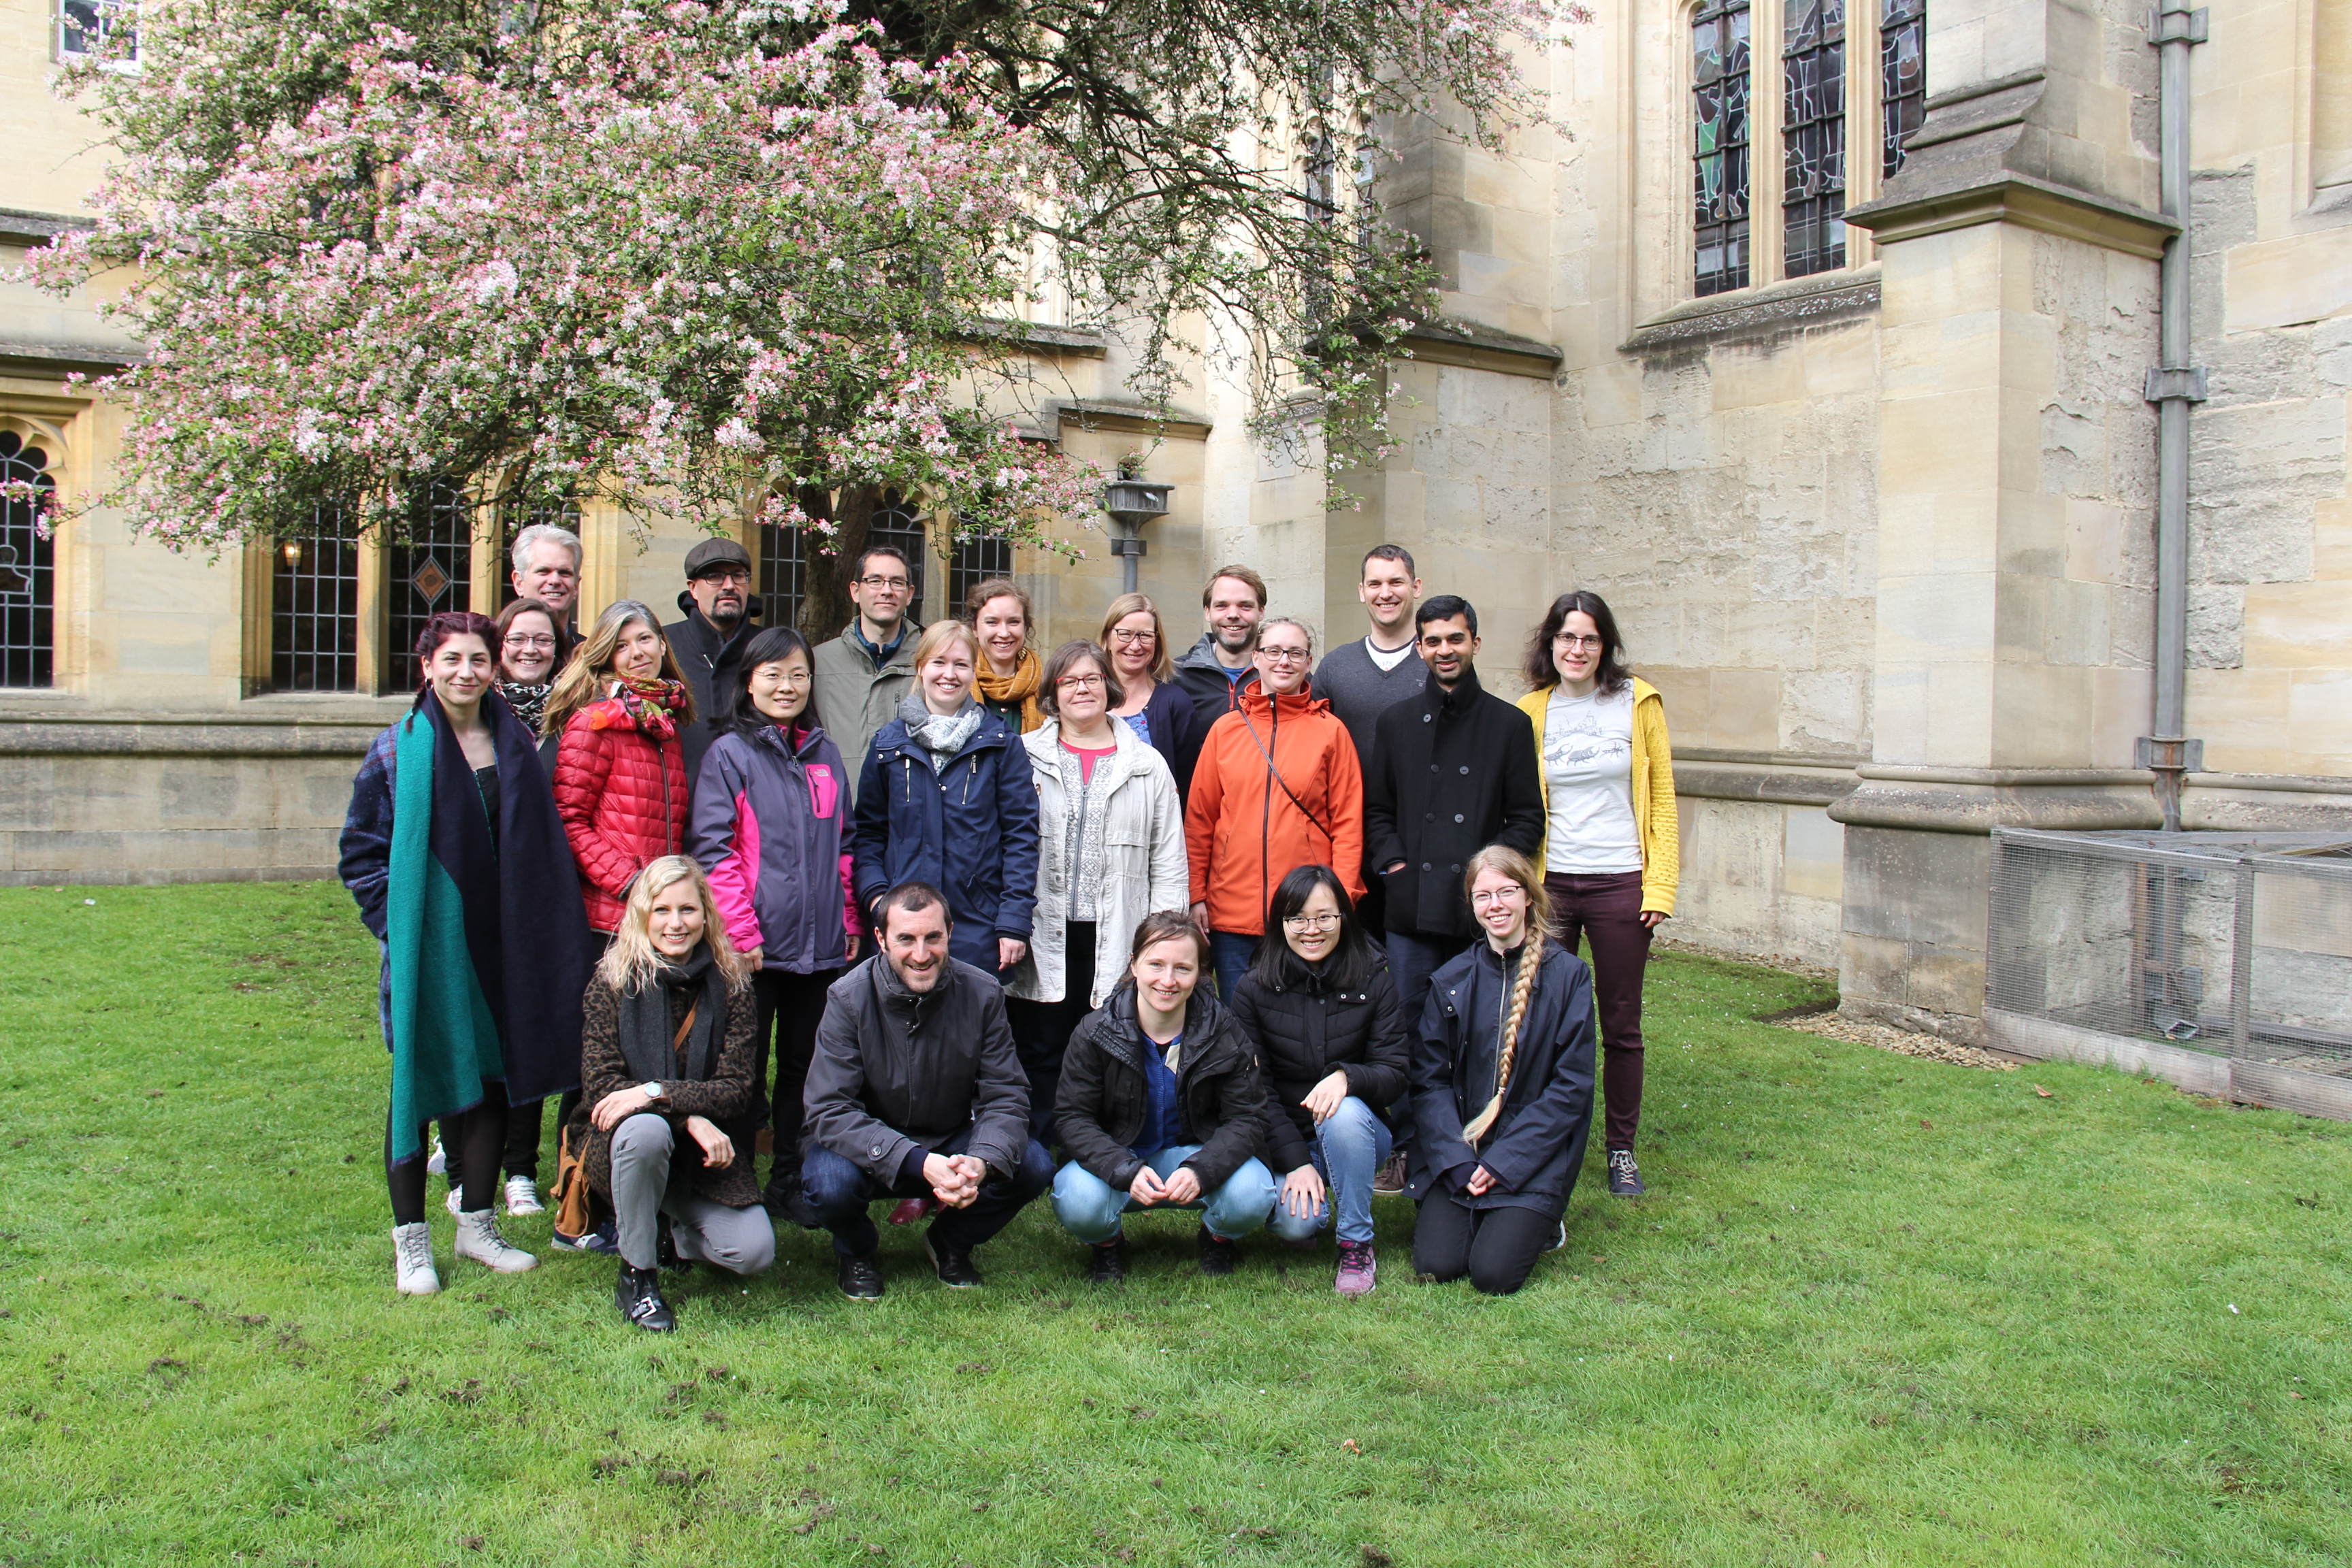 Group photo of the Porse group as it was on our group retreat to Oxford, UK in April 2019.